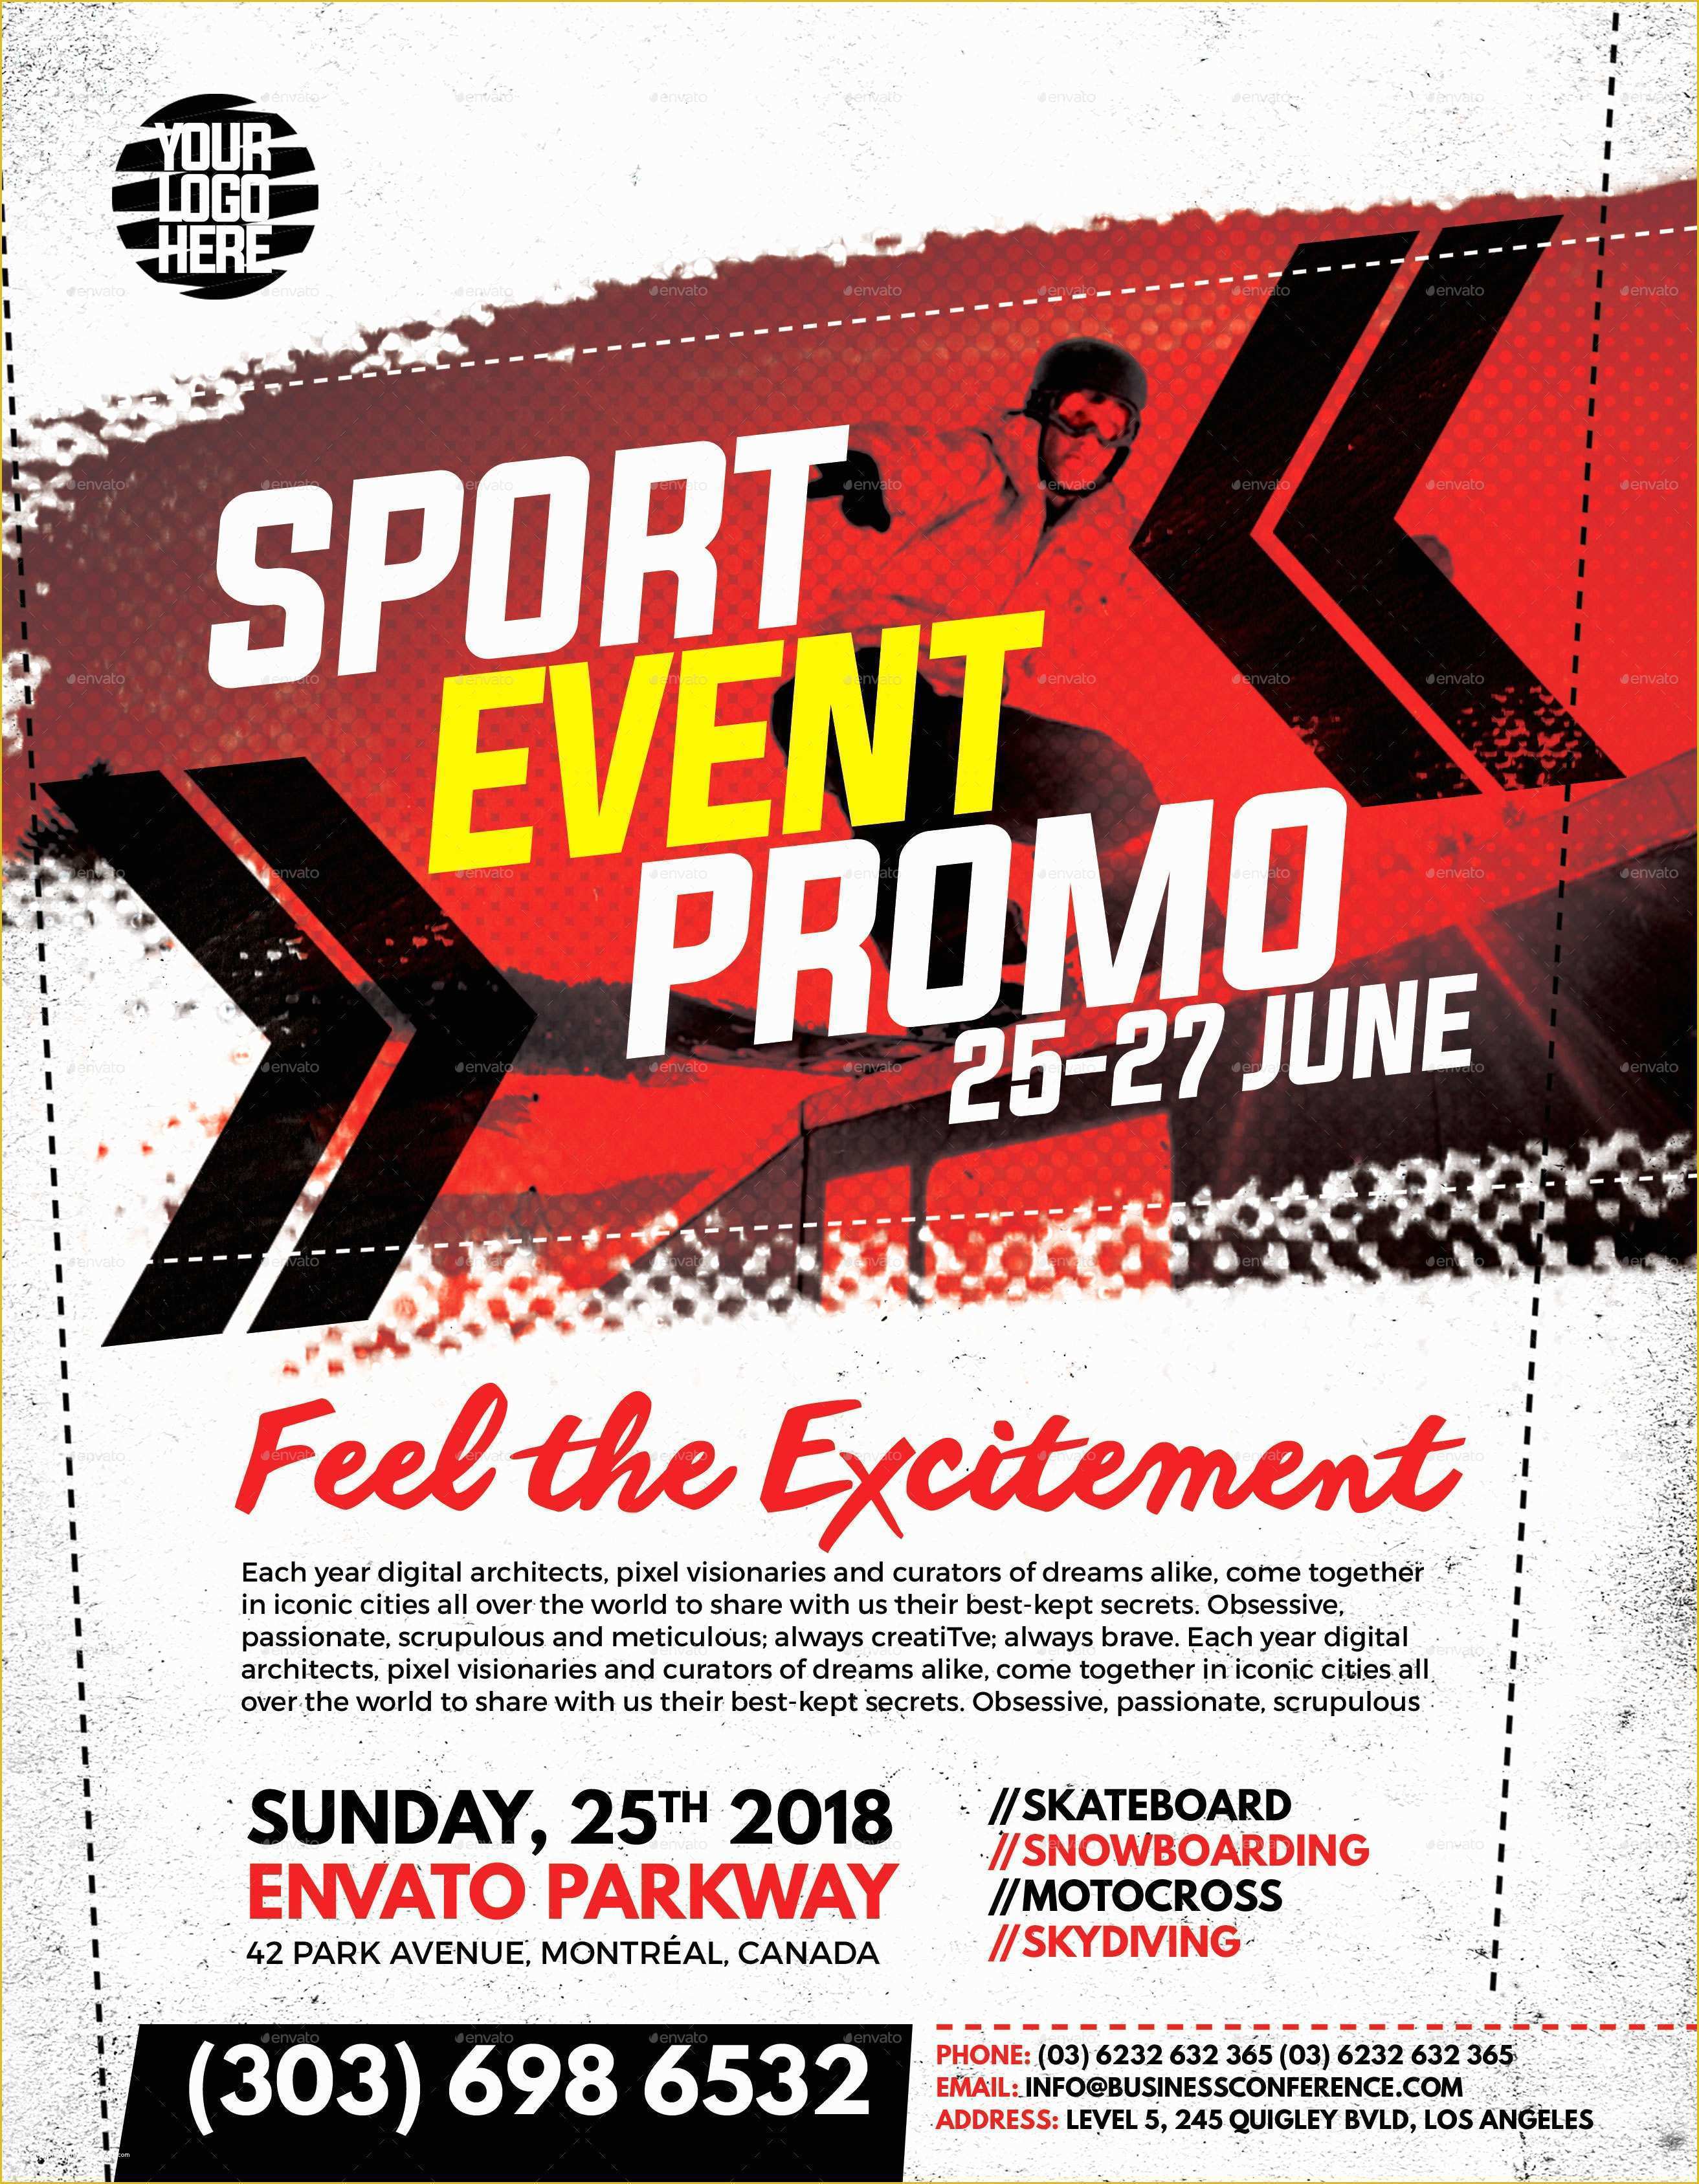 Sports event Flyer Template Free Of Sport event Promo Flyer by Inddesigner